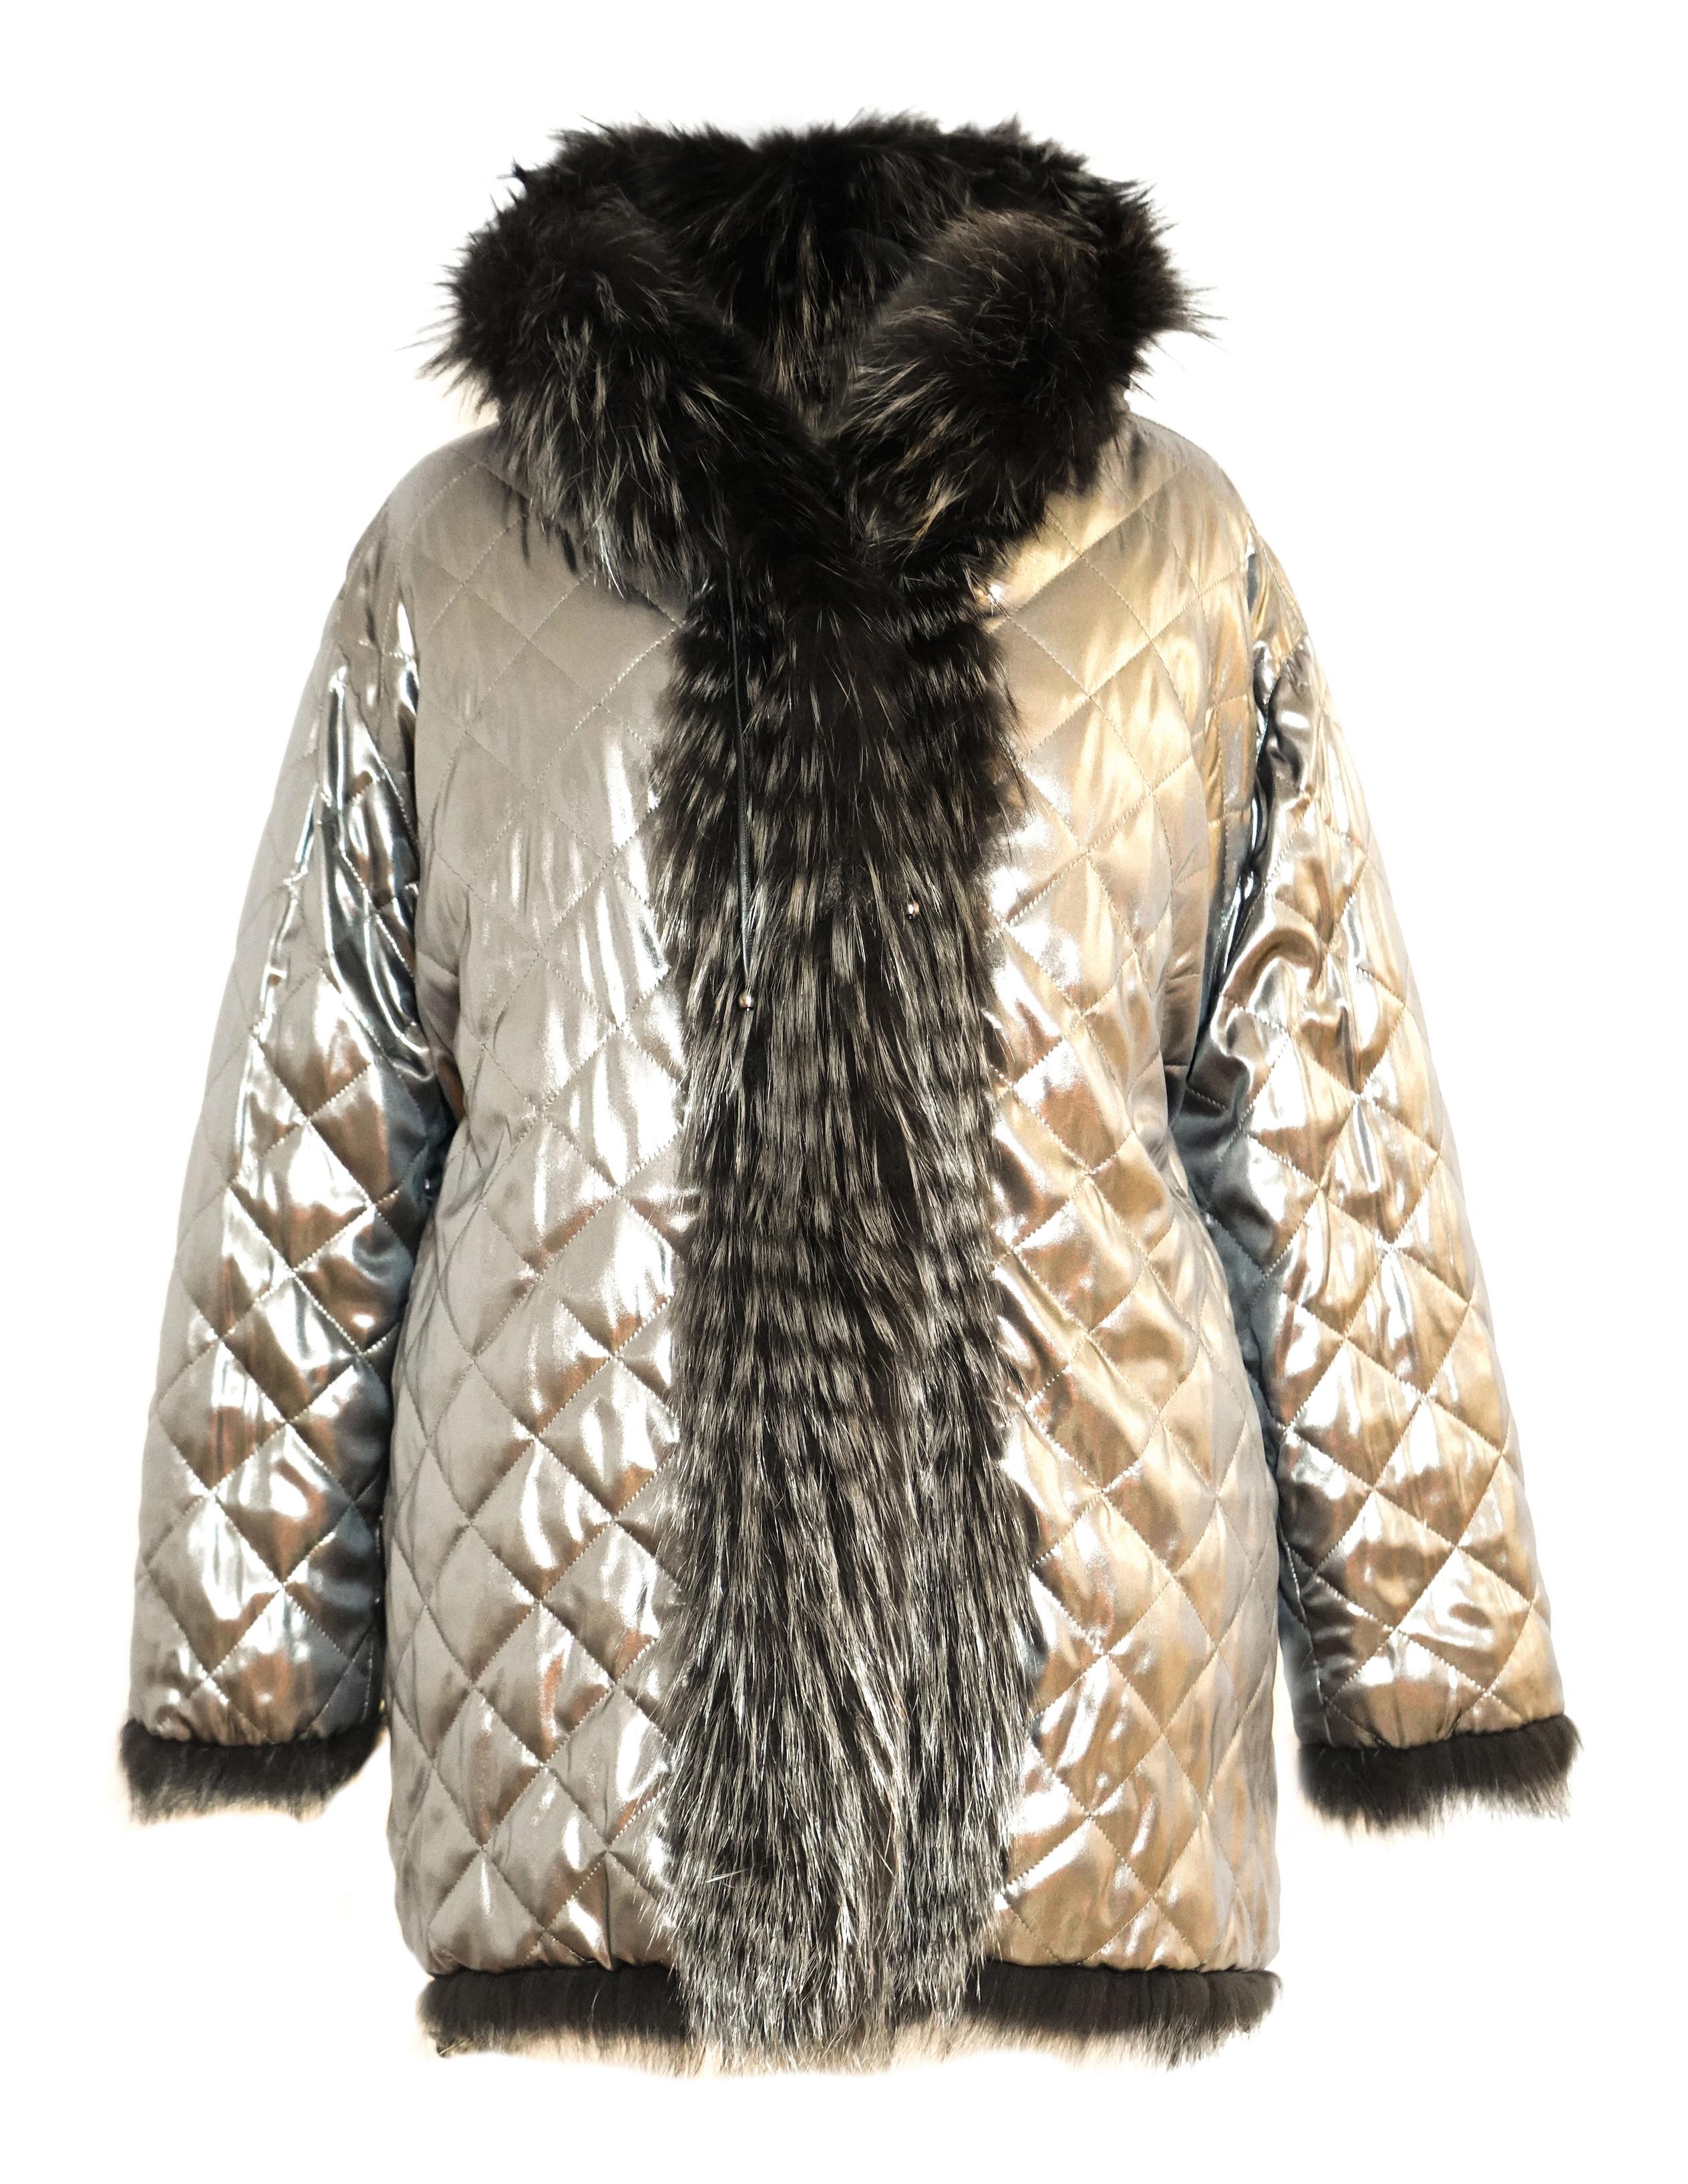 Helen Yarmak Silver Fox Jacket In New Condition For Sale In New York, NY